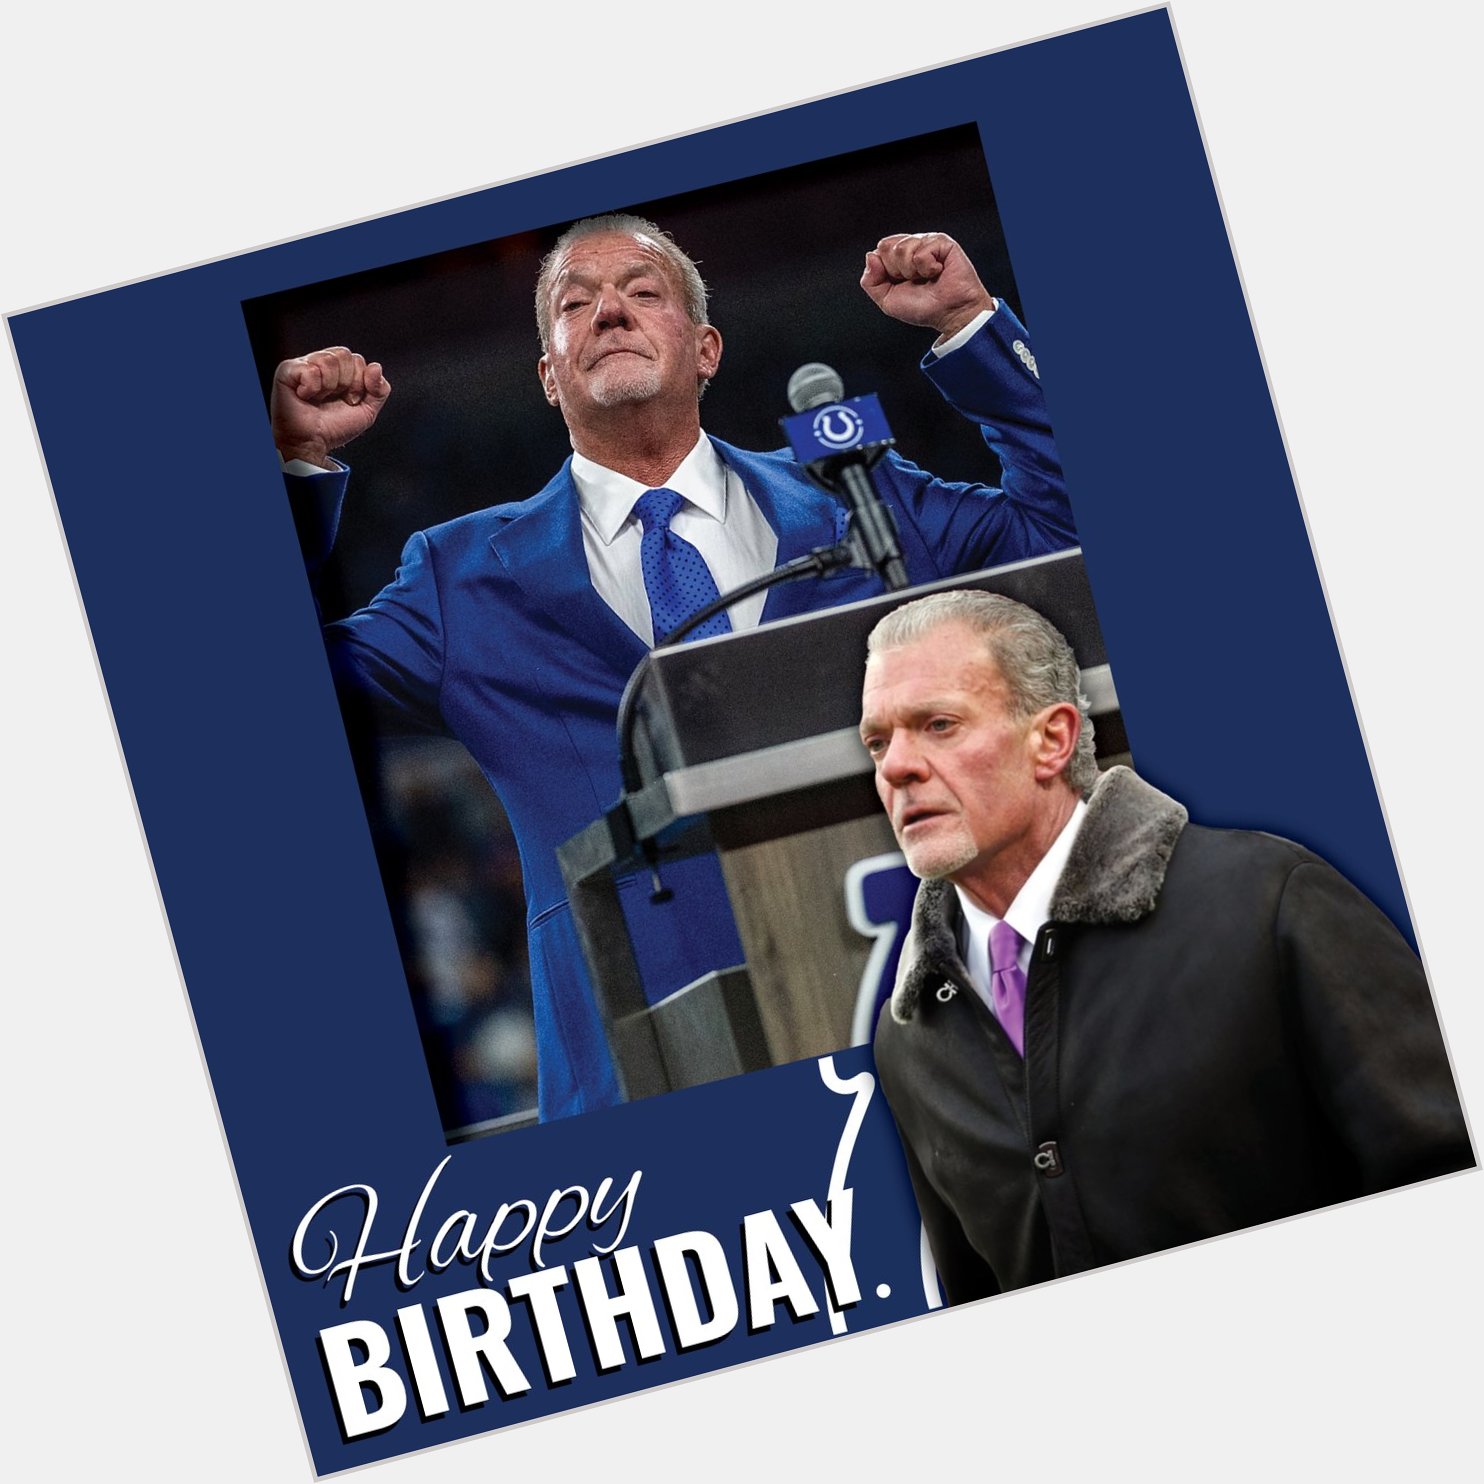 To wish owner Jim Irsay a very happy birthday! 